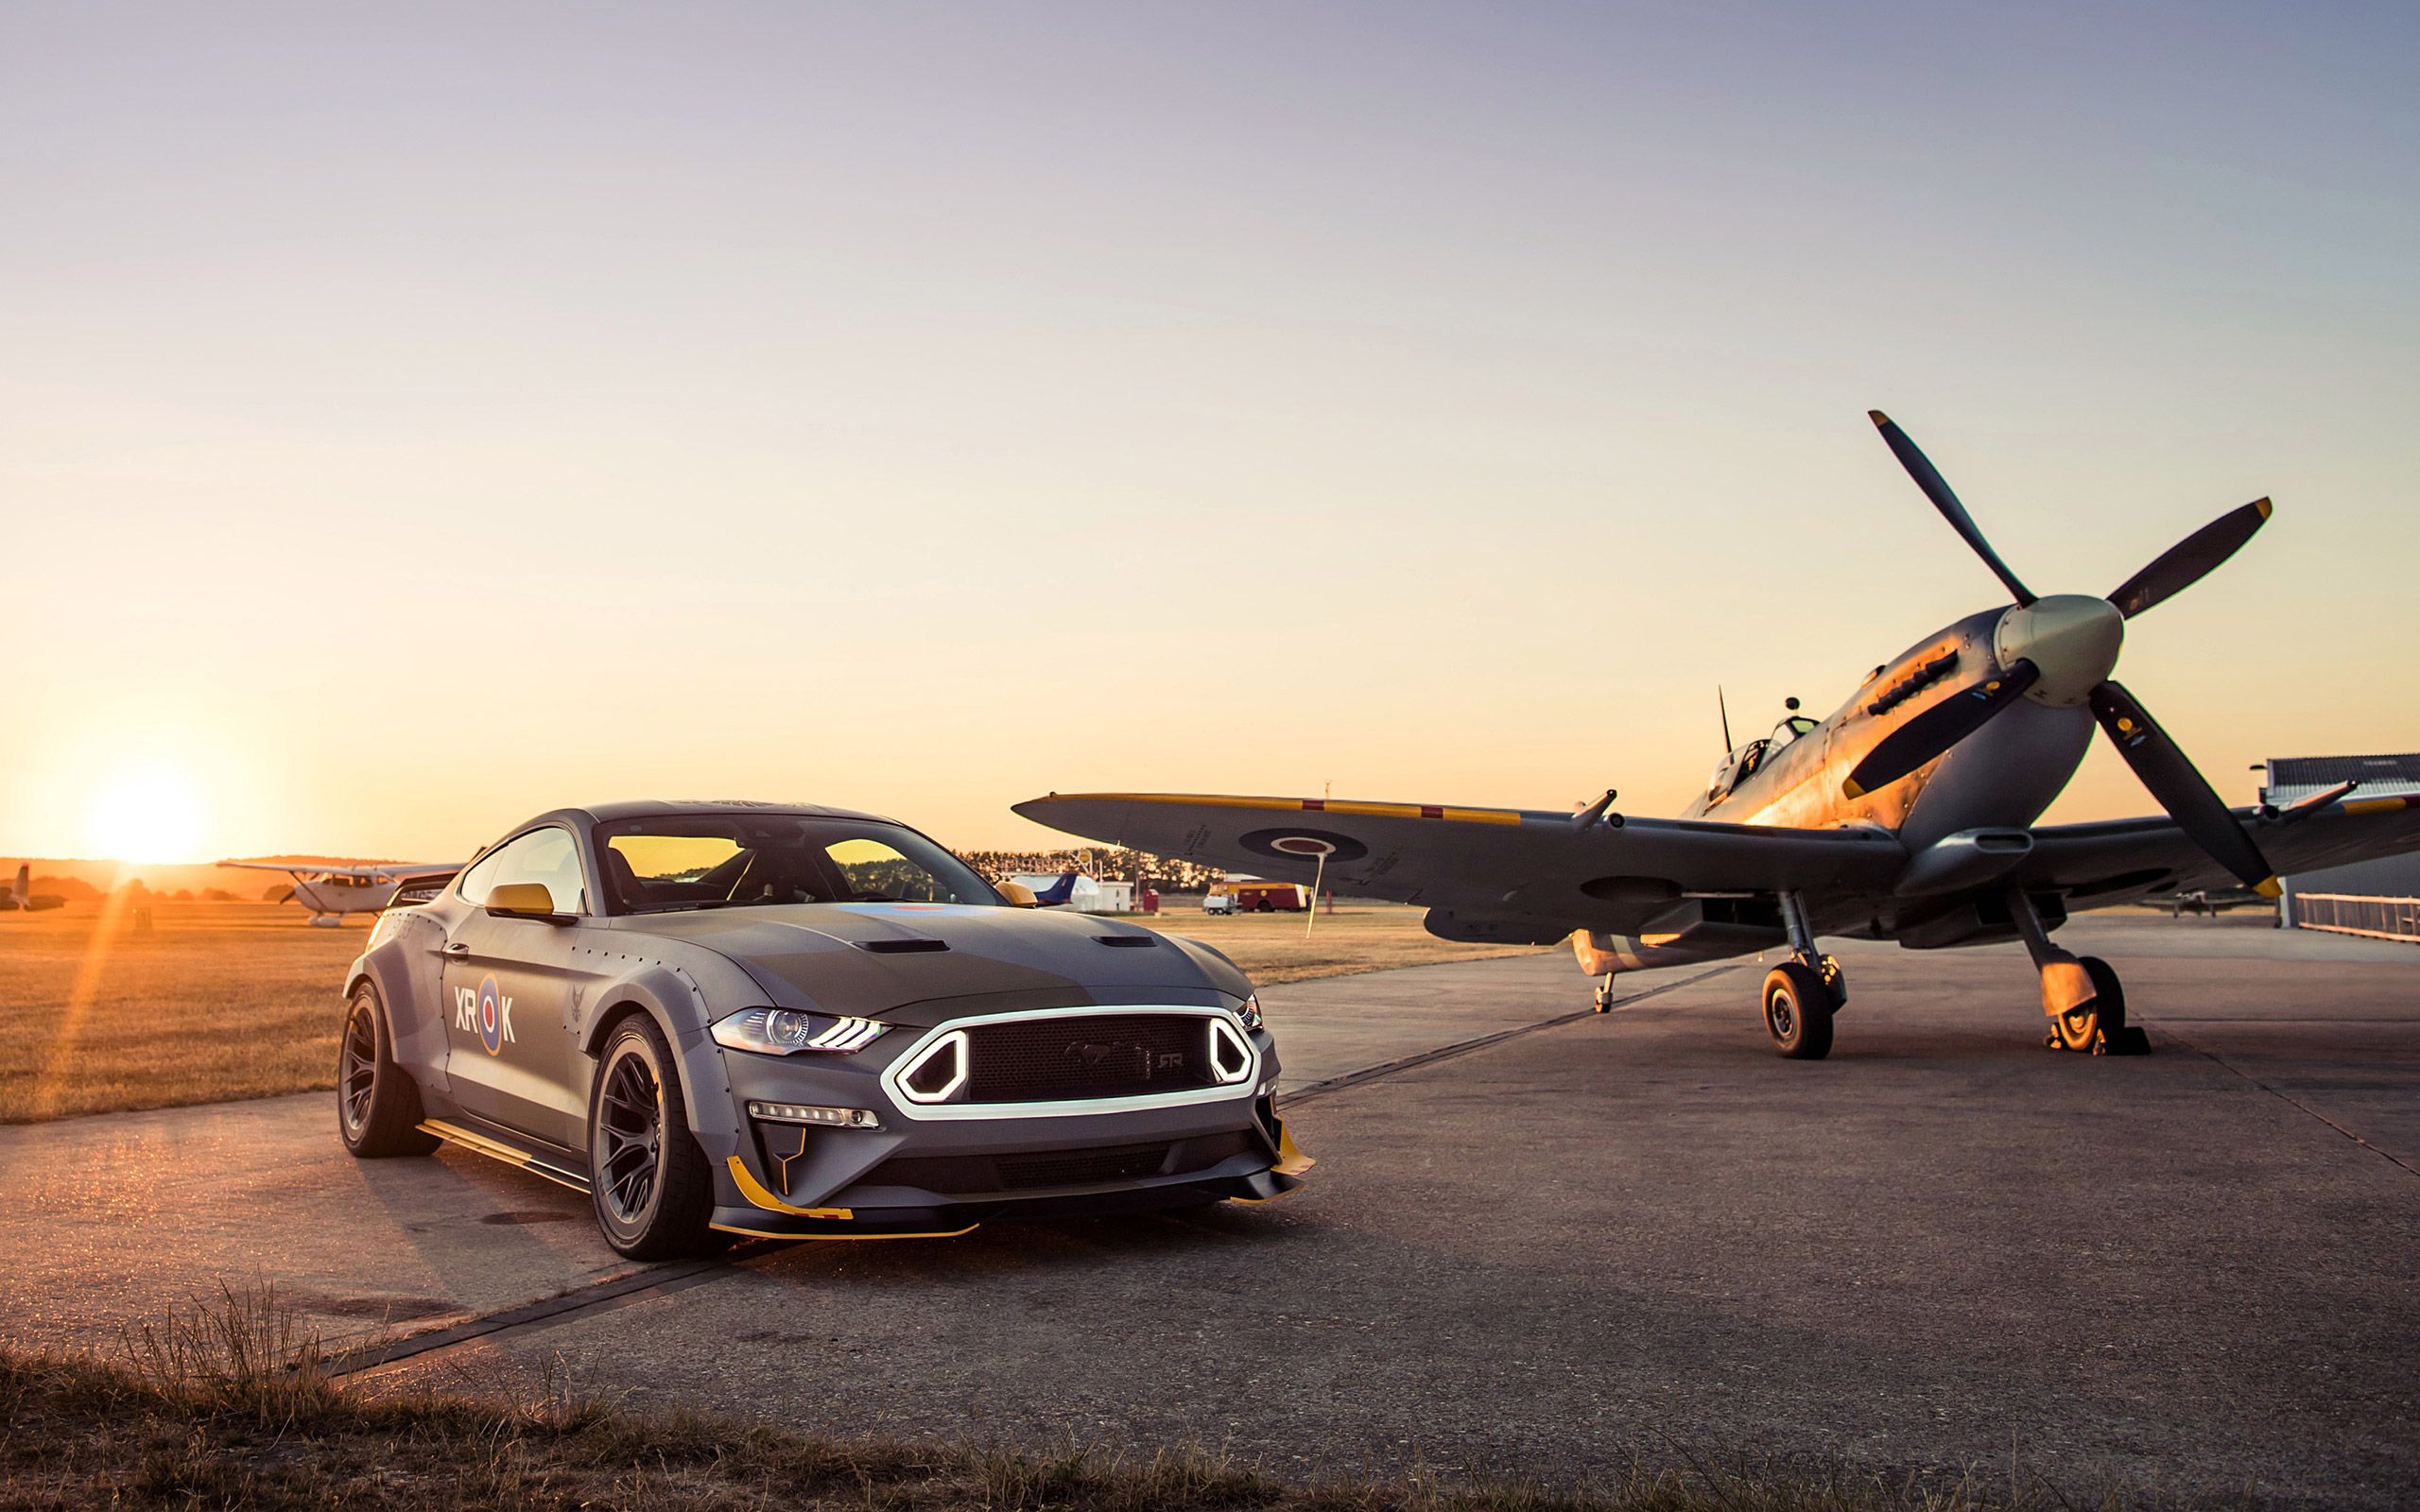 2018-Ford-Eagle-Squadron-Mustang-GT-001-1600